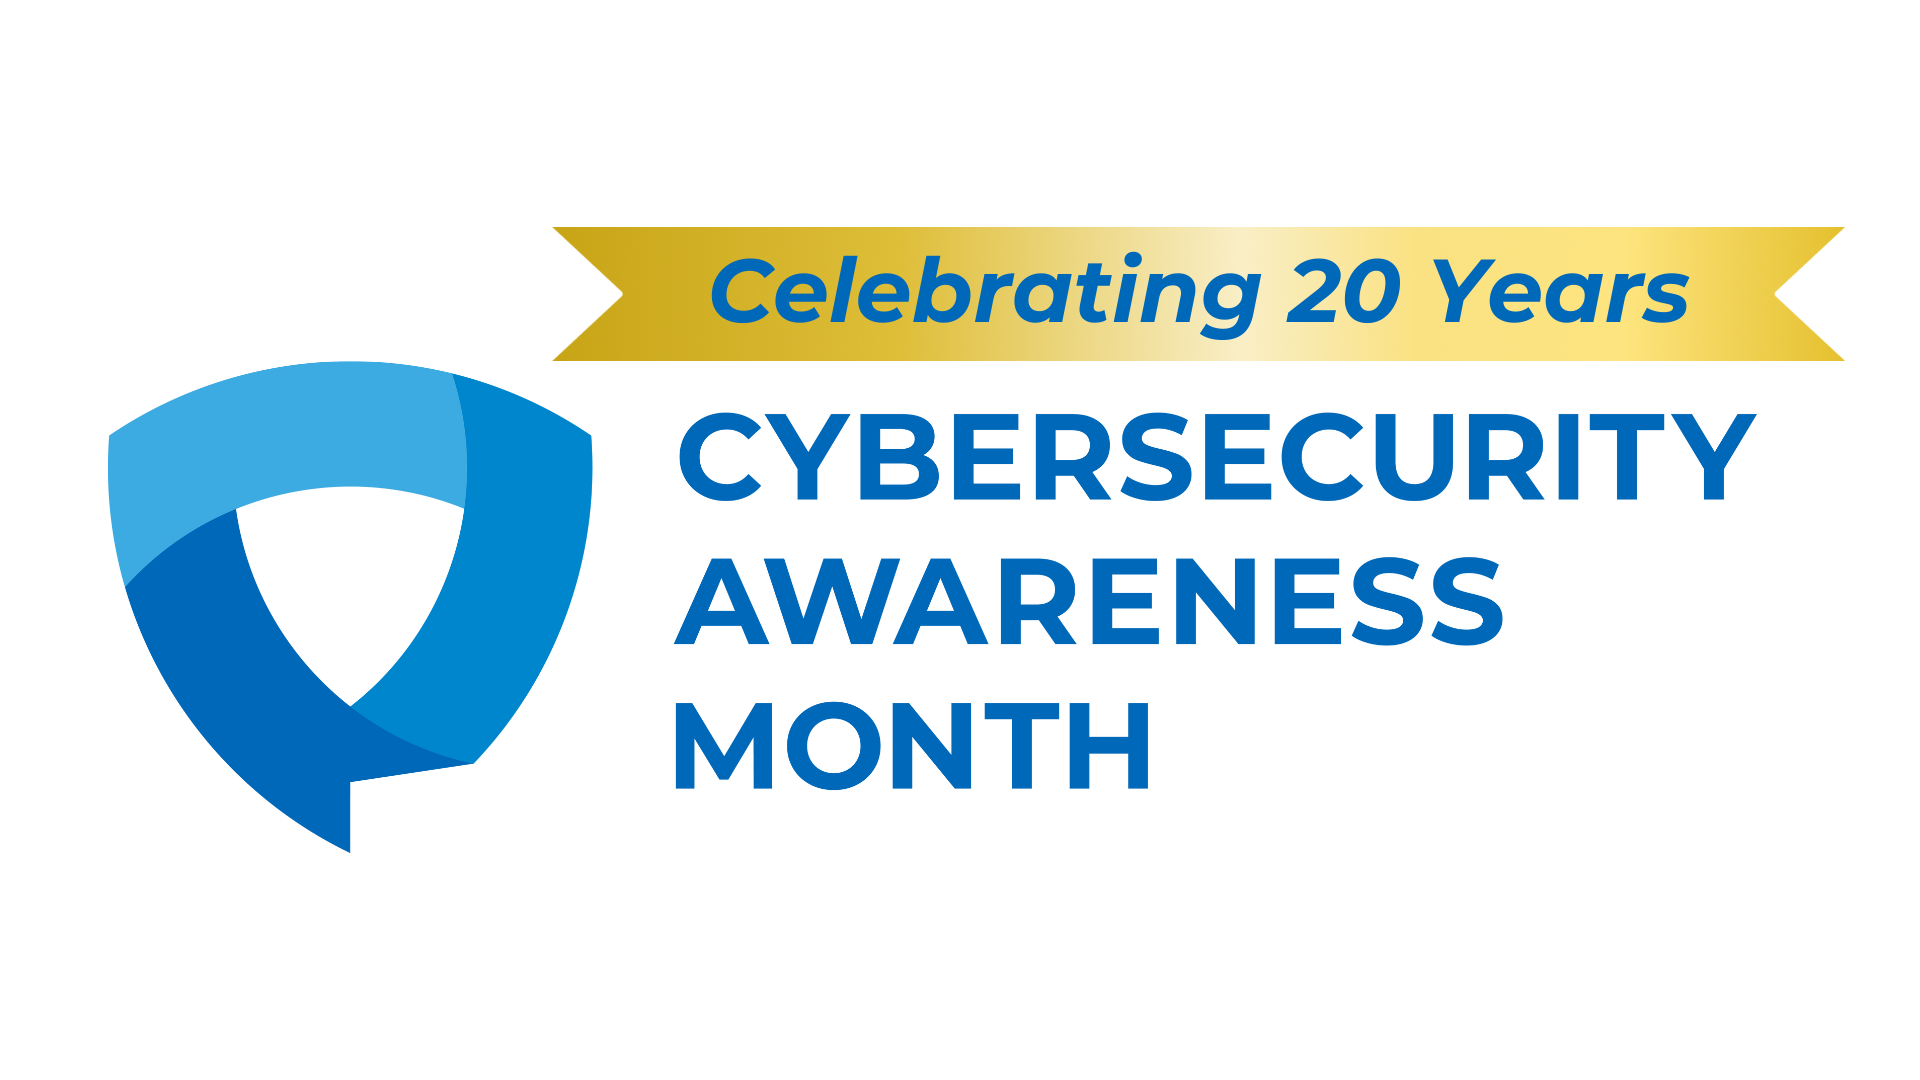 Celebrating 20 years of Cybersecurity Awareness Month